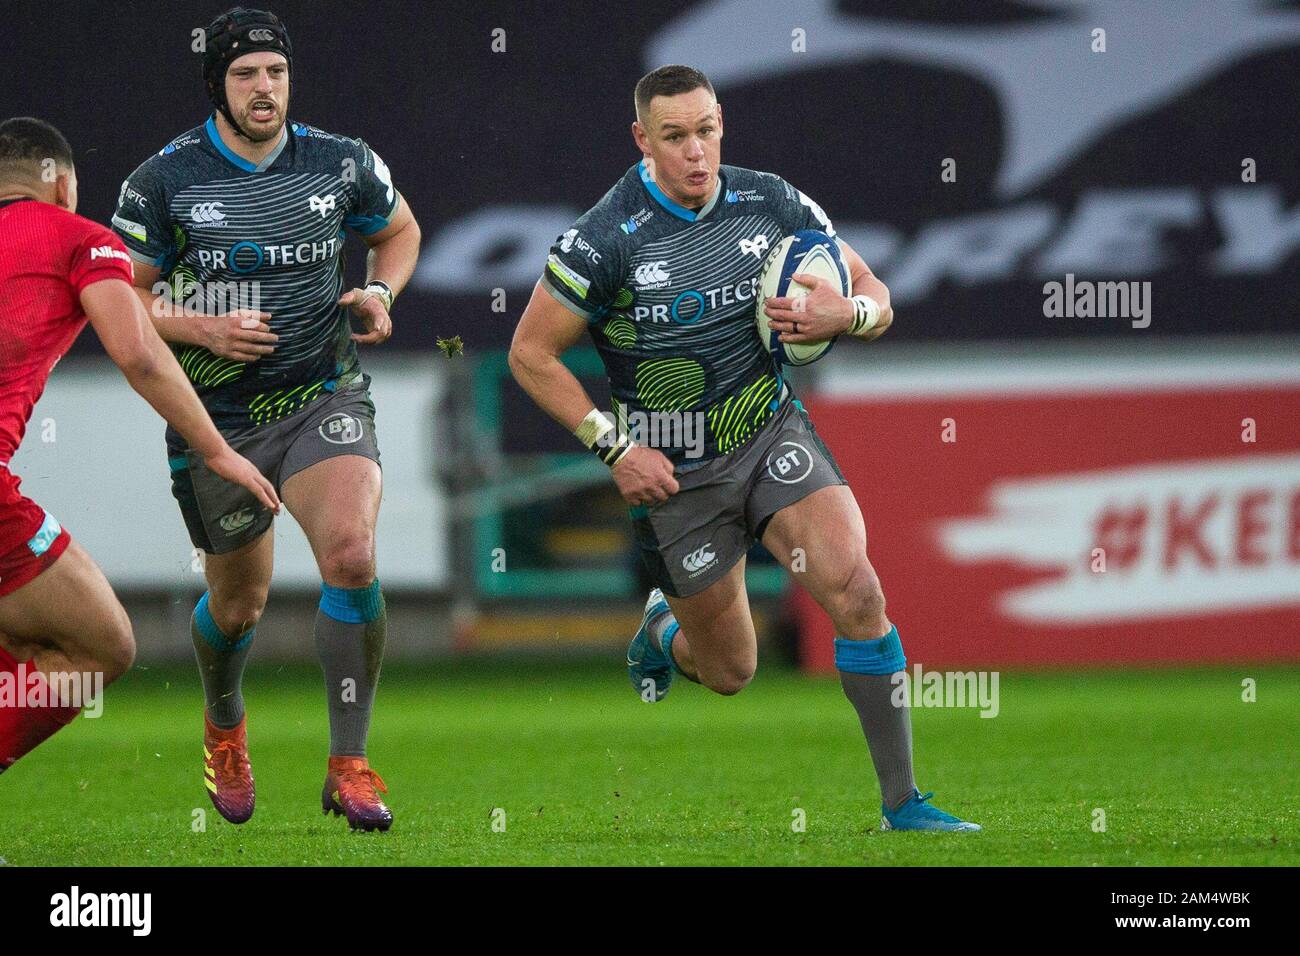 Swansea, UK. 11th Jan, 2020. Ospreys right wing Hanno Dirksen on the attack in the Ospreys v Saracens Heineken Champions Cup Rugby Match. Credit: Gruffydd Ll. Thomas/Alamy Live News Stock Photo